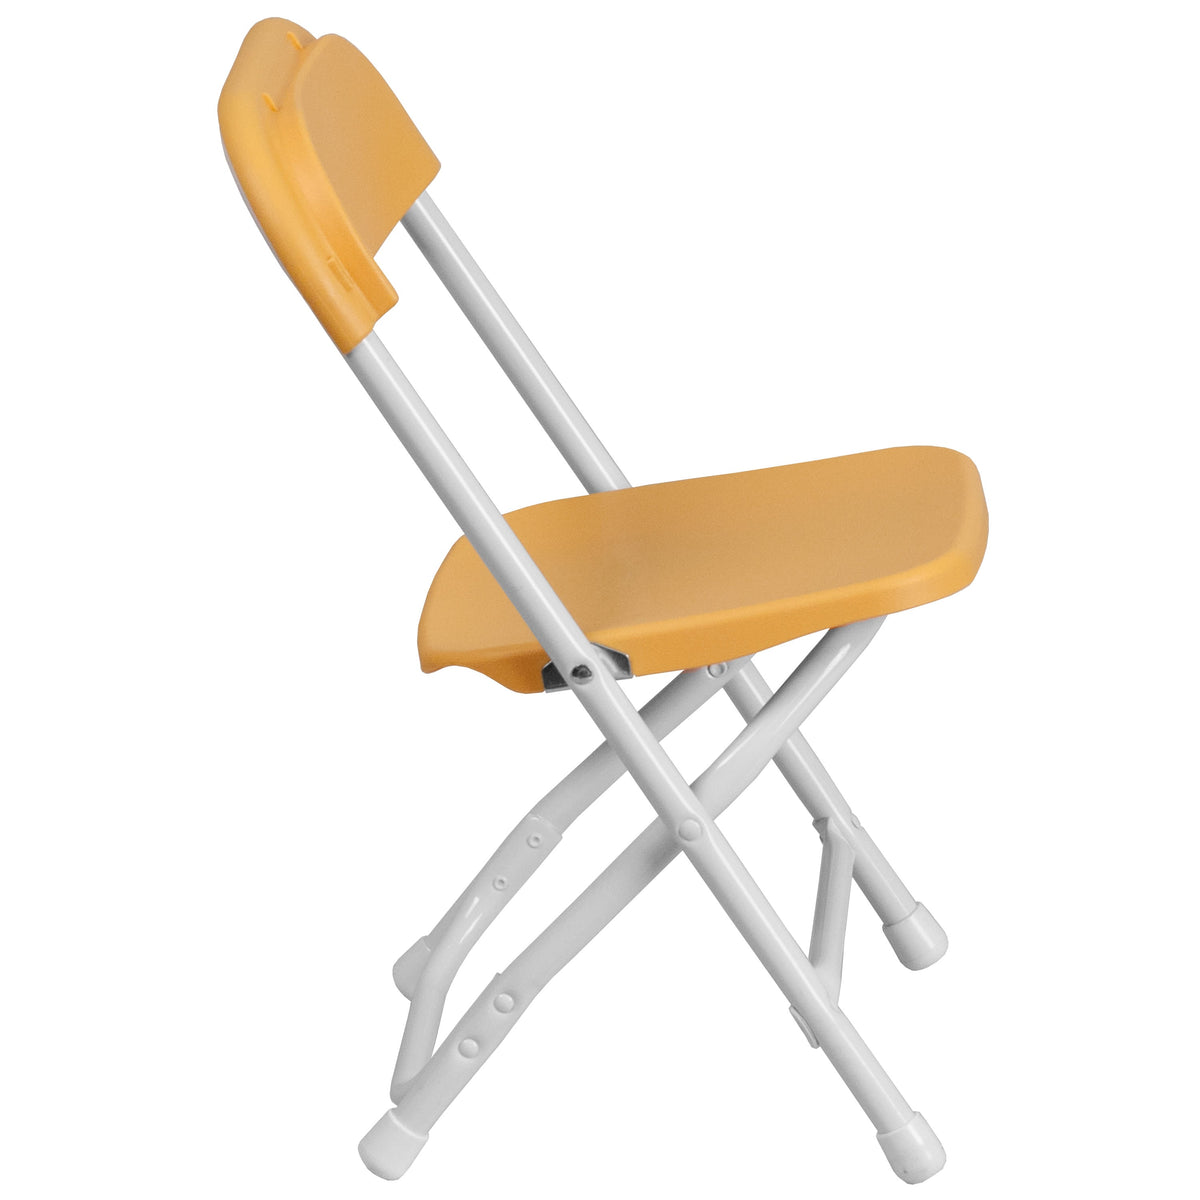 Yellow |#| Kids Yellow Plastic Folding Chair with Textured Seat - Preschool Seating